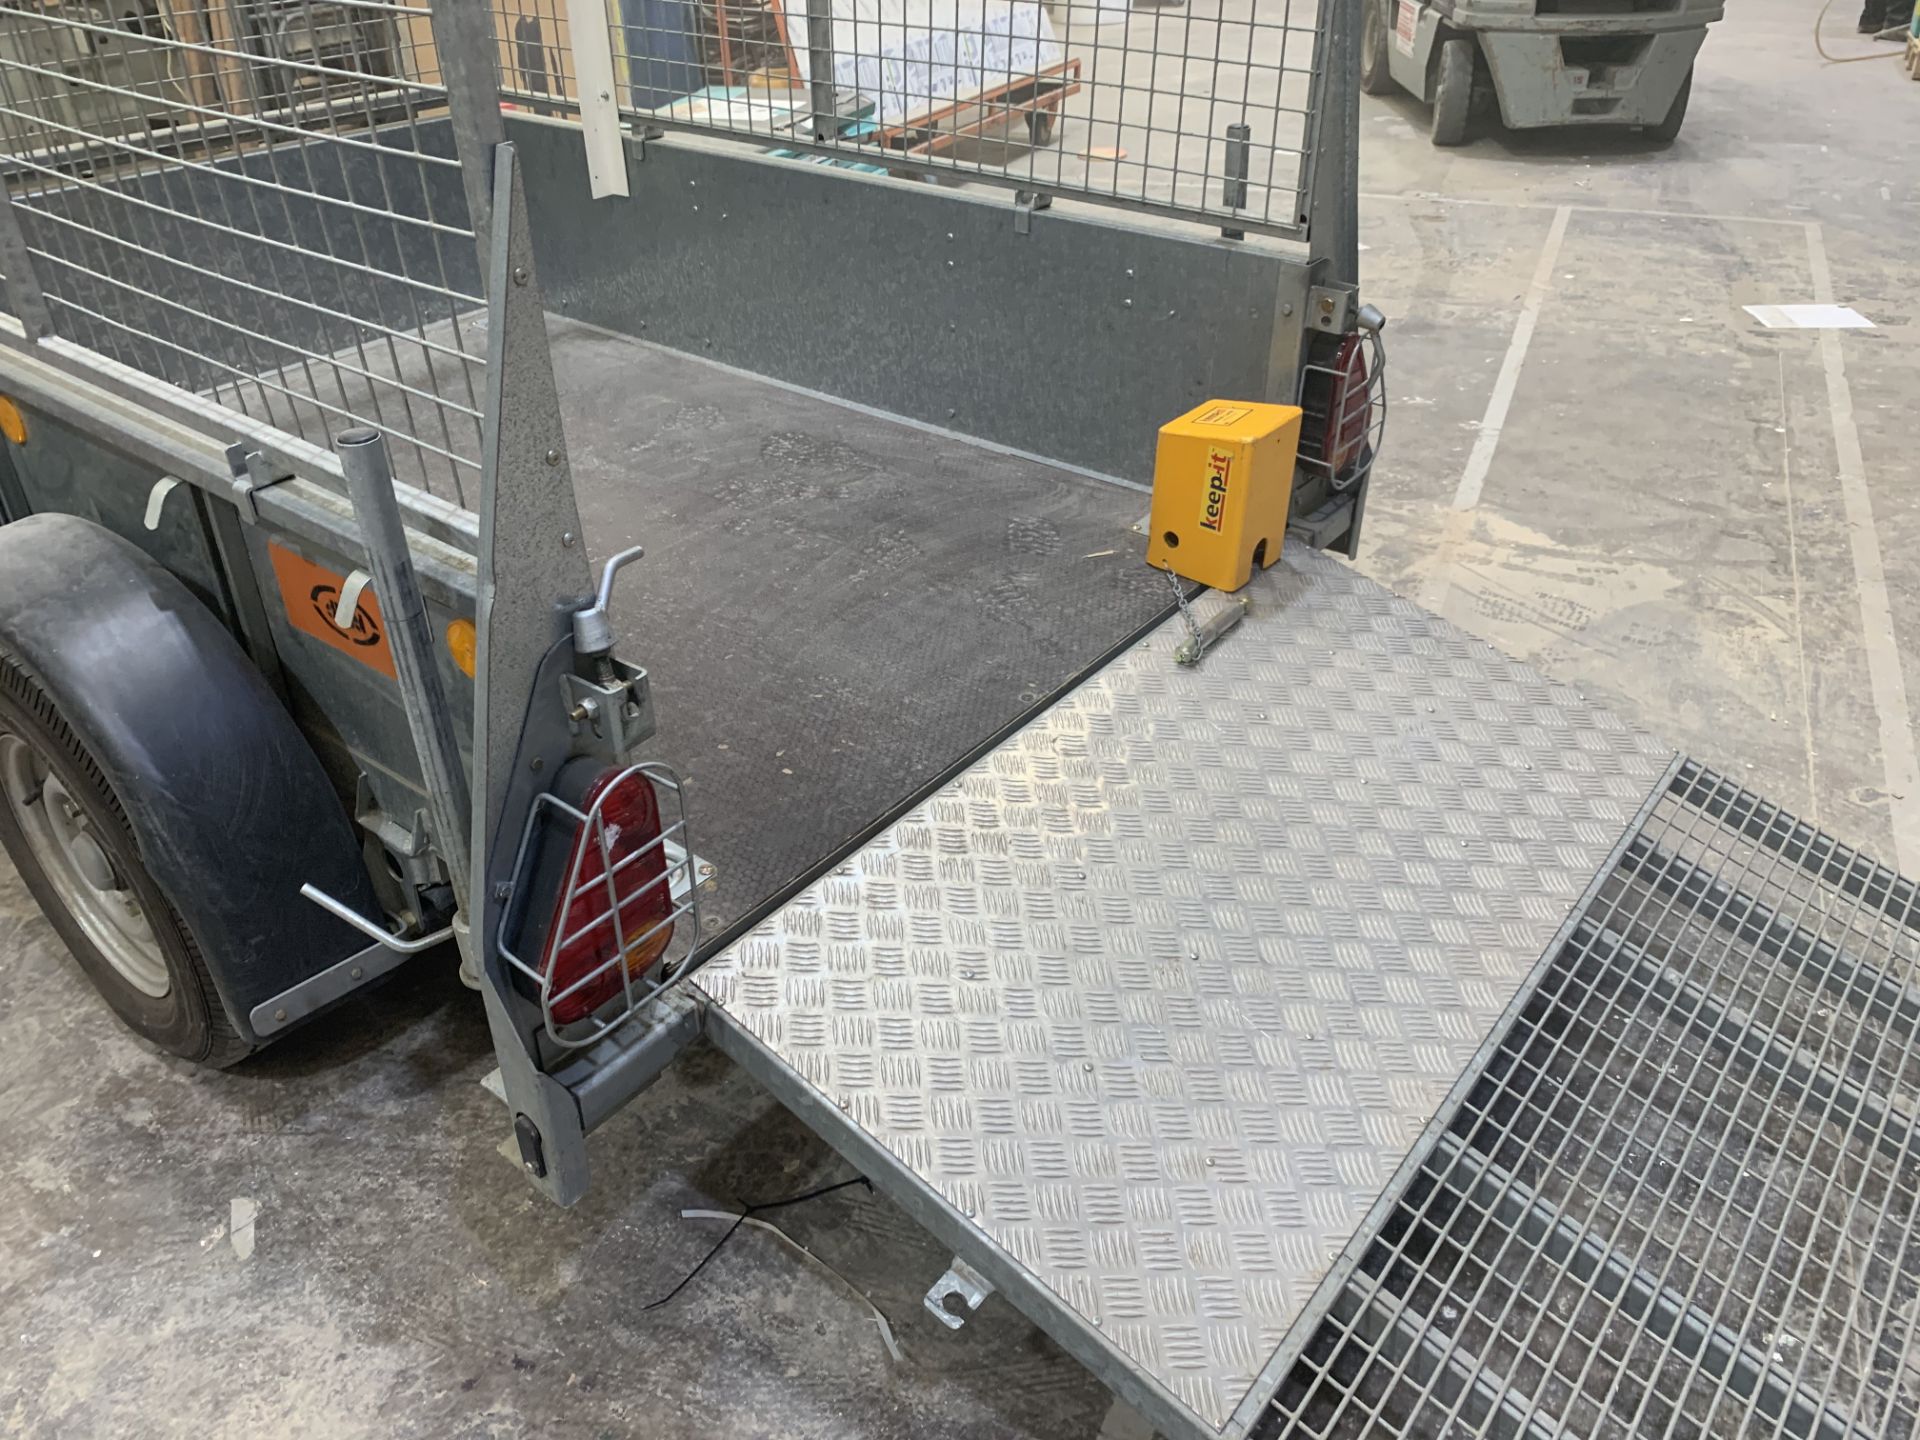 Ifor Williams Ramp & Mesh Trailer 2M long, 1.3M wide x 1.27M high type e*11 1400kg - Image 7 of 9